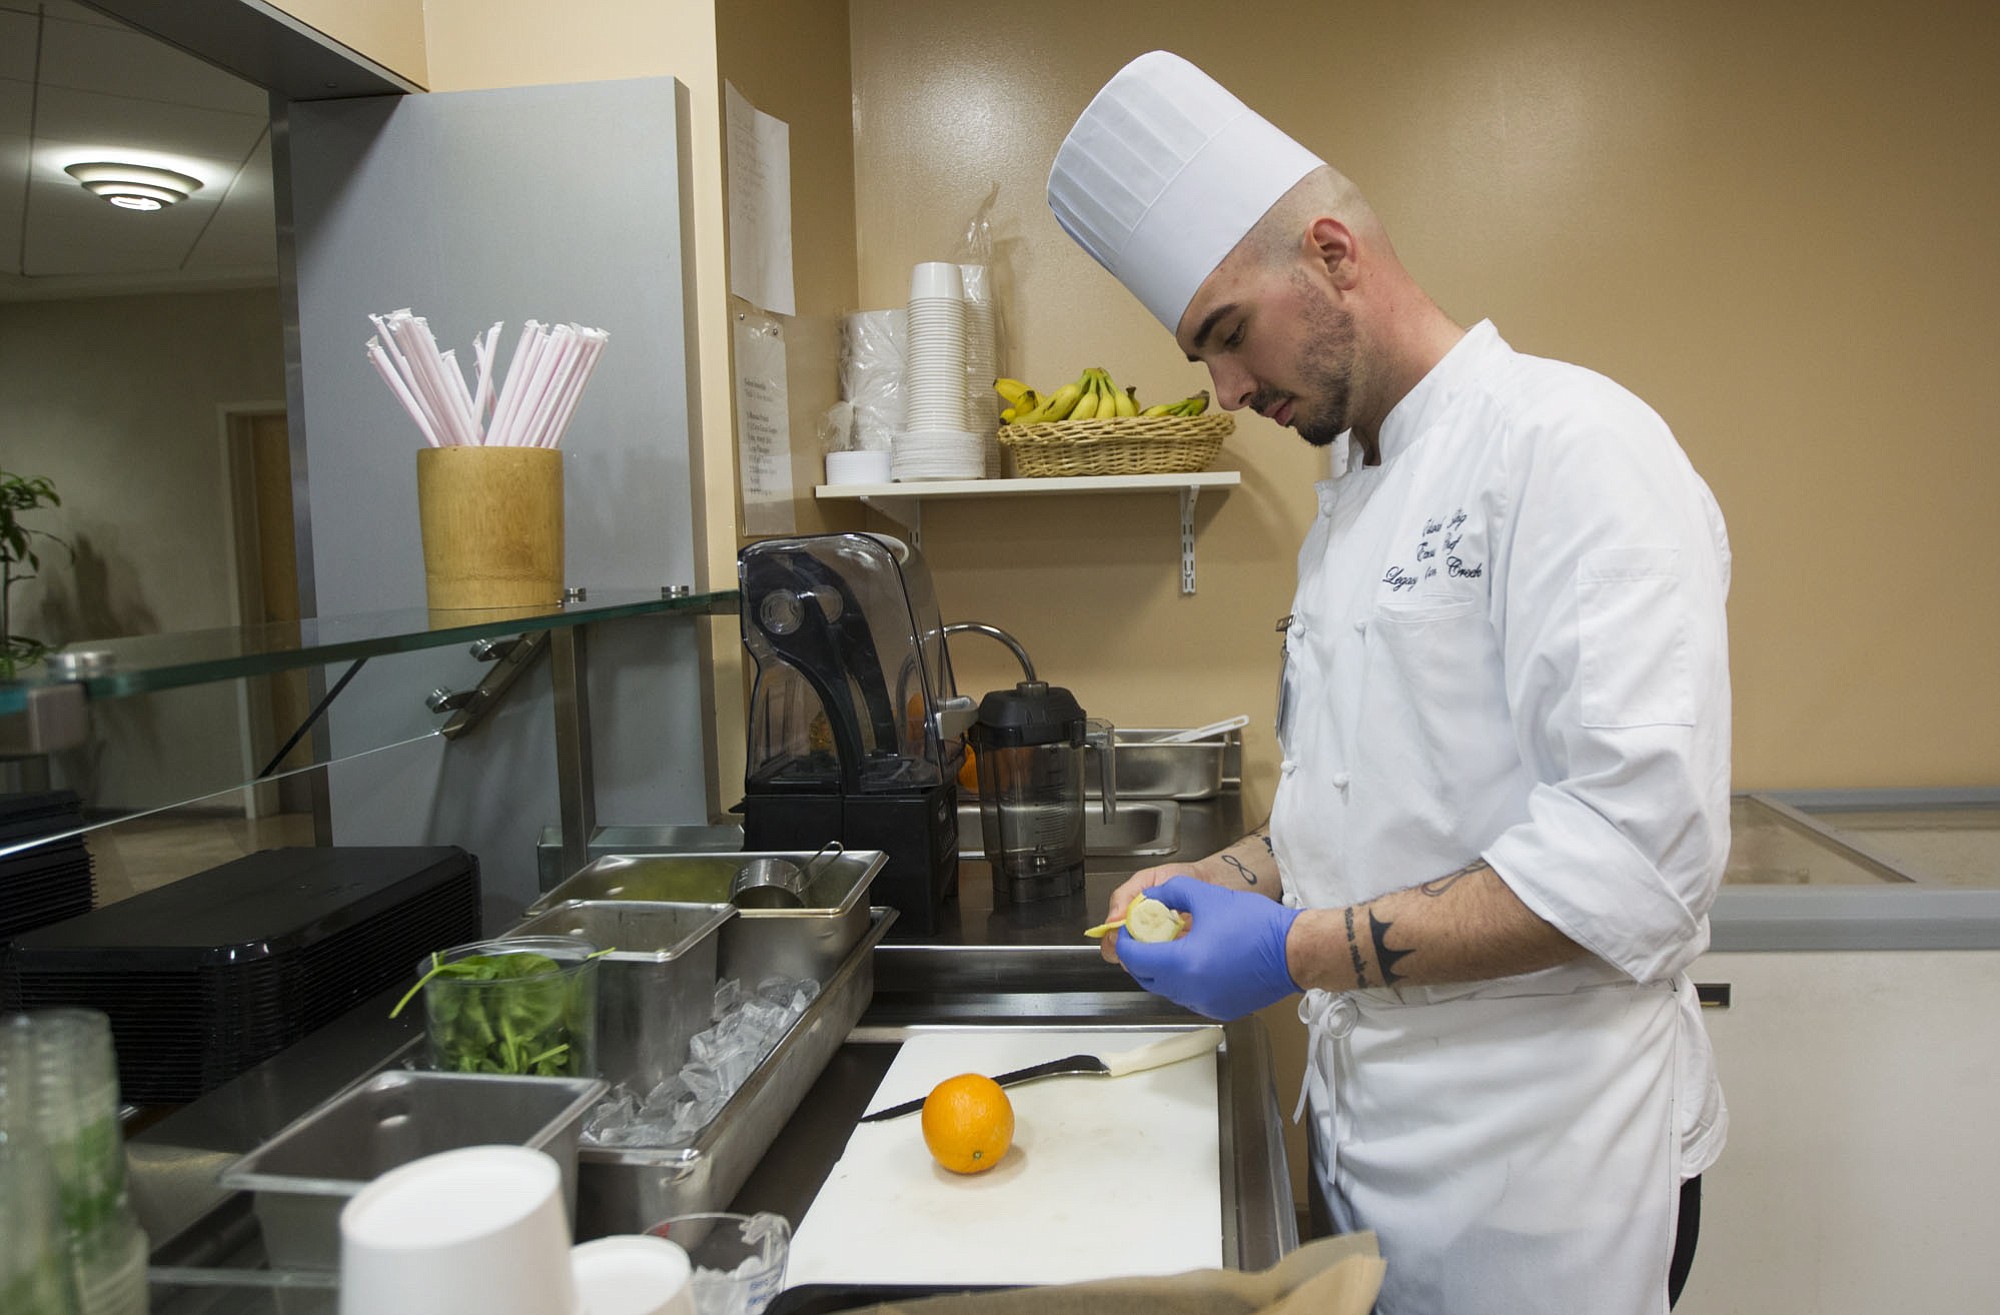 Executive chef Edward Helbig makes a fruit smoothie at the Terrace Caf? inside Legacy Salmon Creek Medical Center in Vancouver. The smoothies are part of a larger effort to offer healthier menu items.